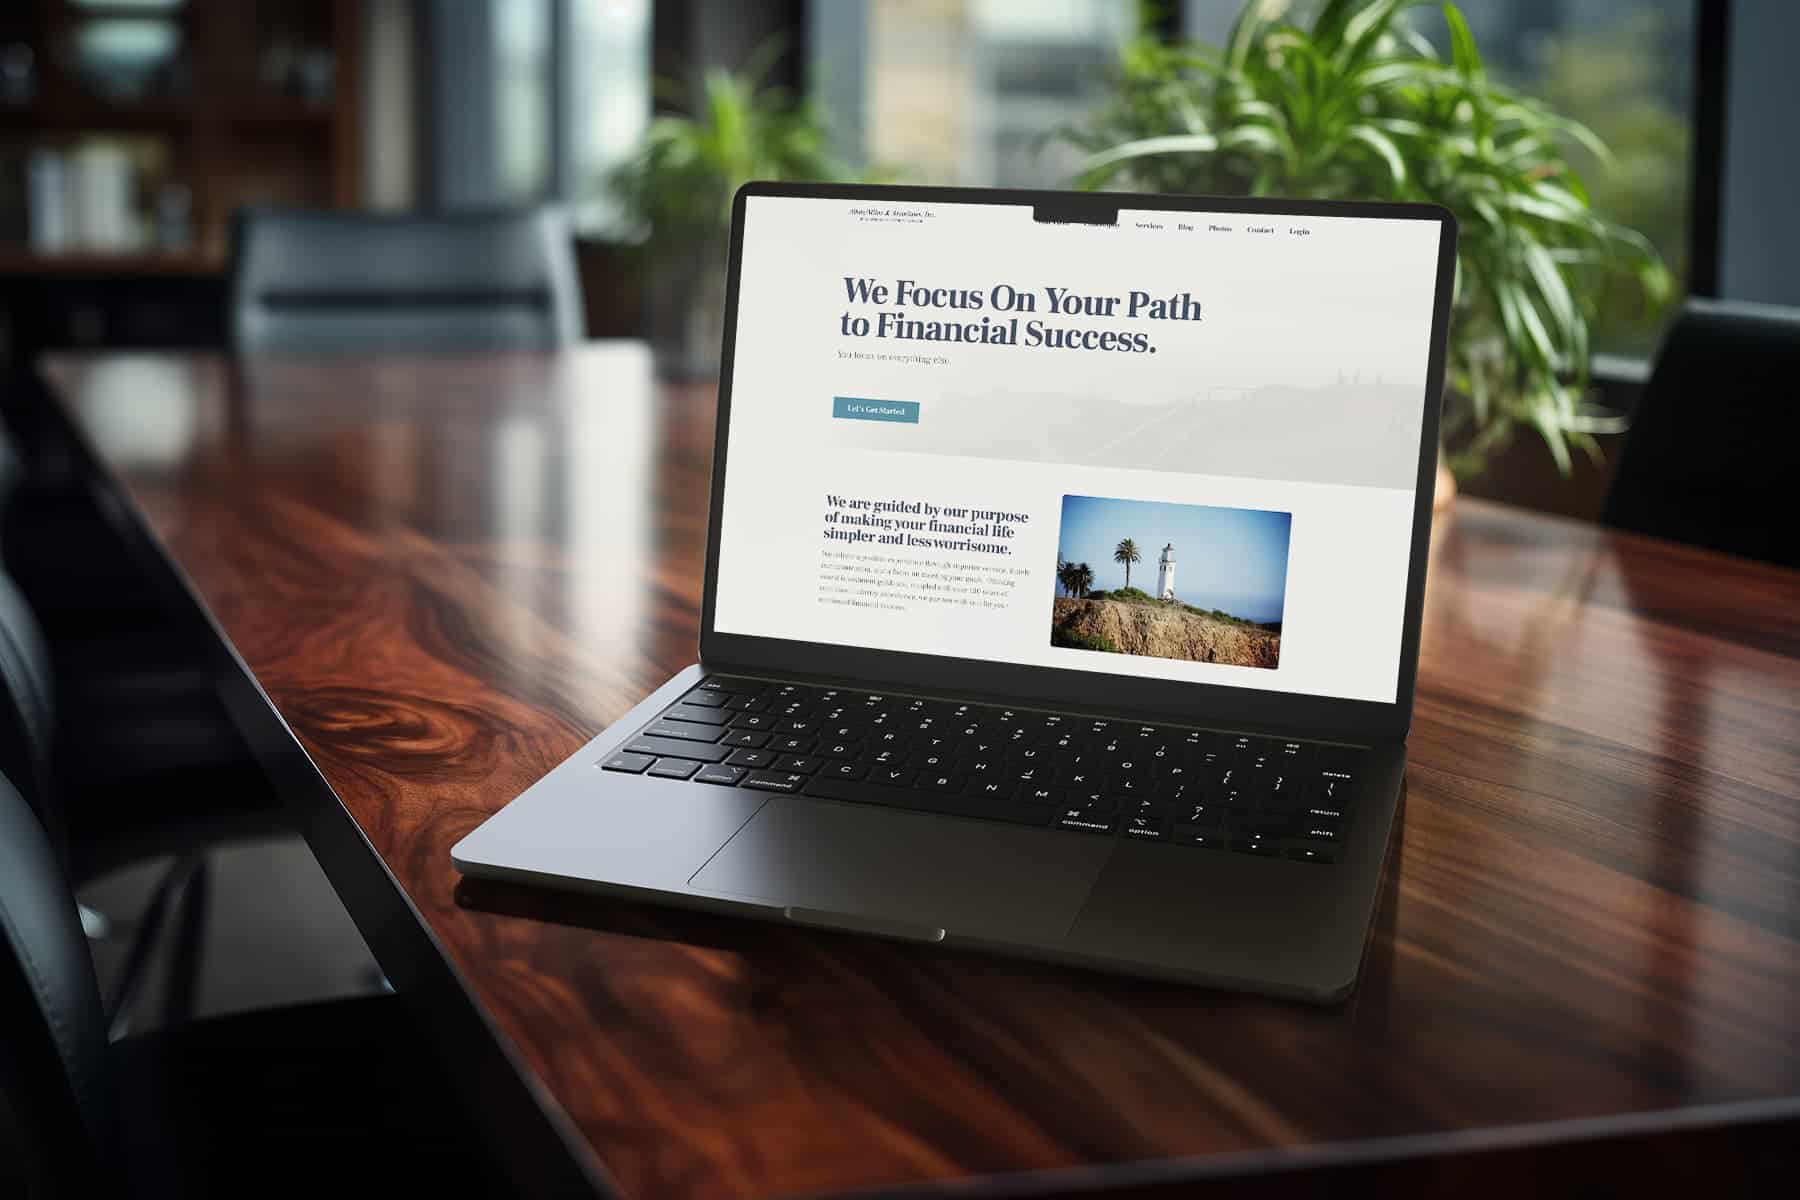 A laptop on a wooden table displaying a website titled "we focus on your path to financial success," featuring a slogan and an image of wind turbines.